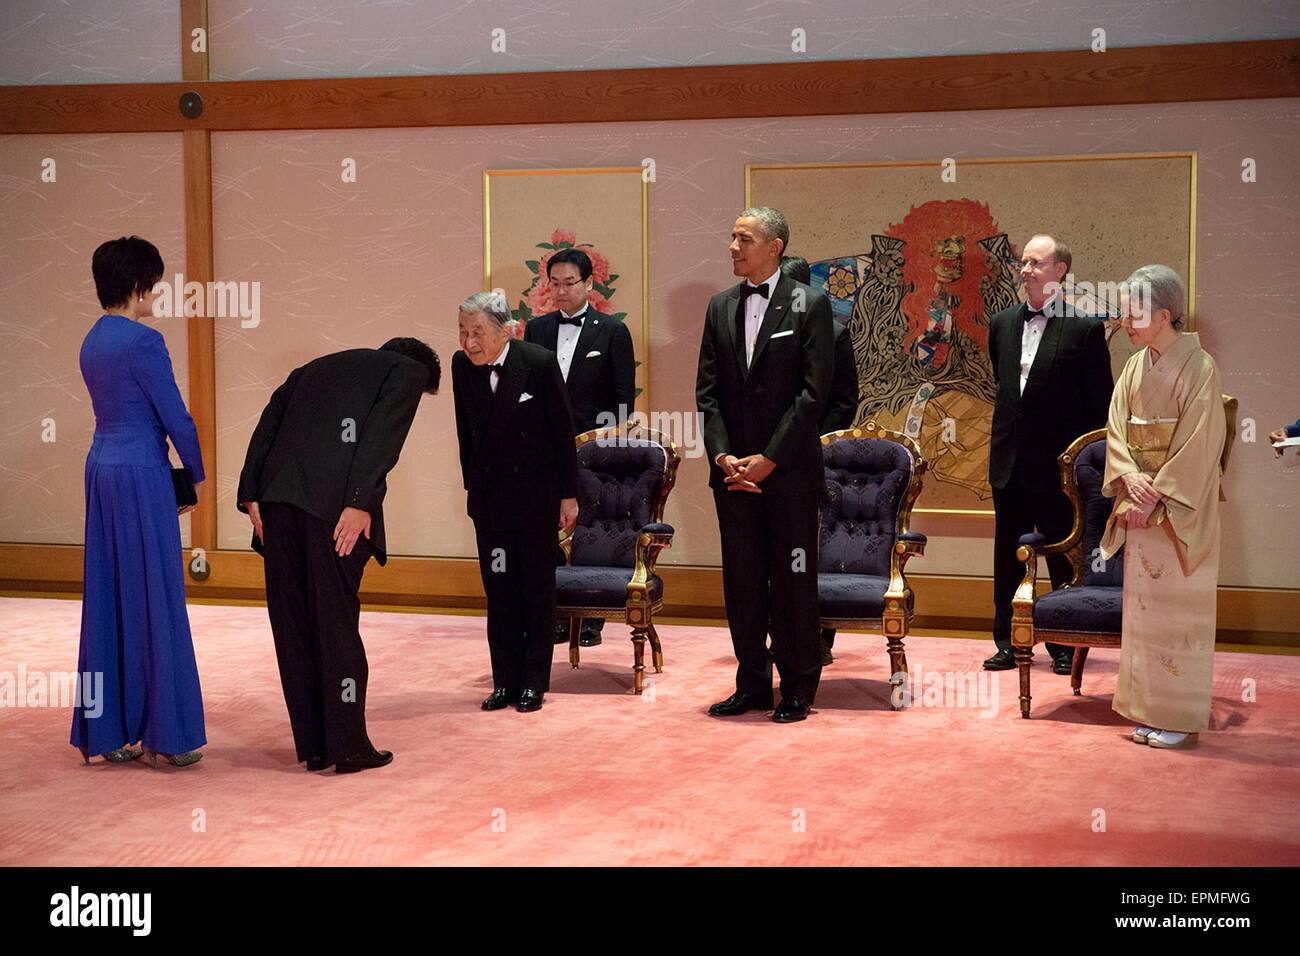 Japanese Prime Minister Shinzo Abe and wife Akie Abe bow as they greet Emperor Akihito as U.S. President Barack Obama and Empress Michiko look on prior to a state dinner at the Imperial Palace April 24, 2104 in Tokyo, Japan. Stock Photo